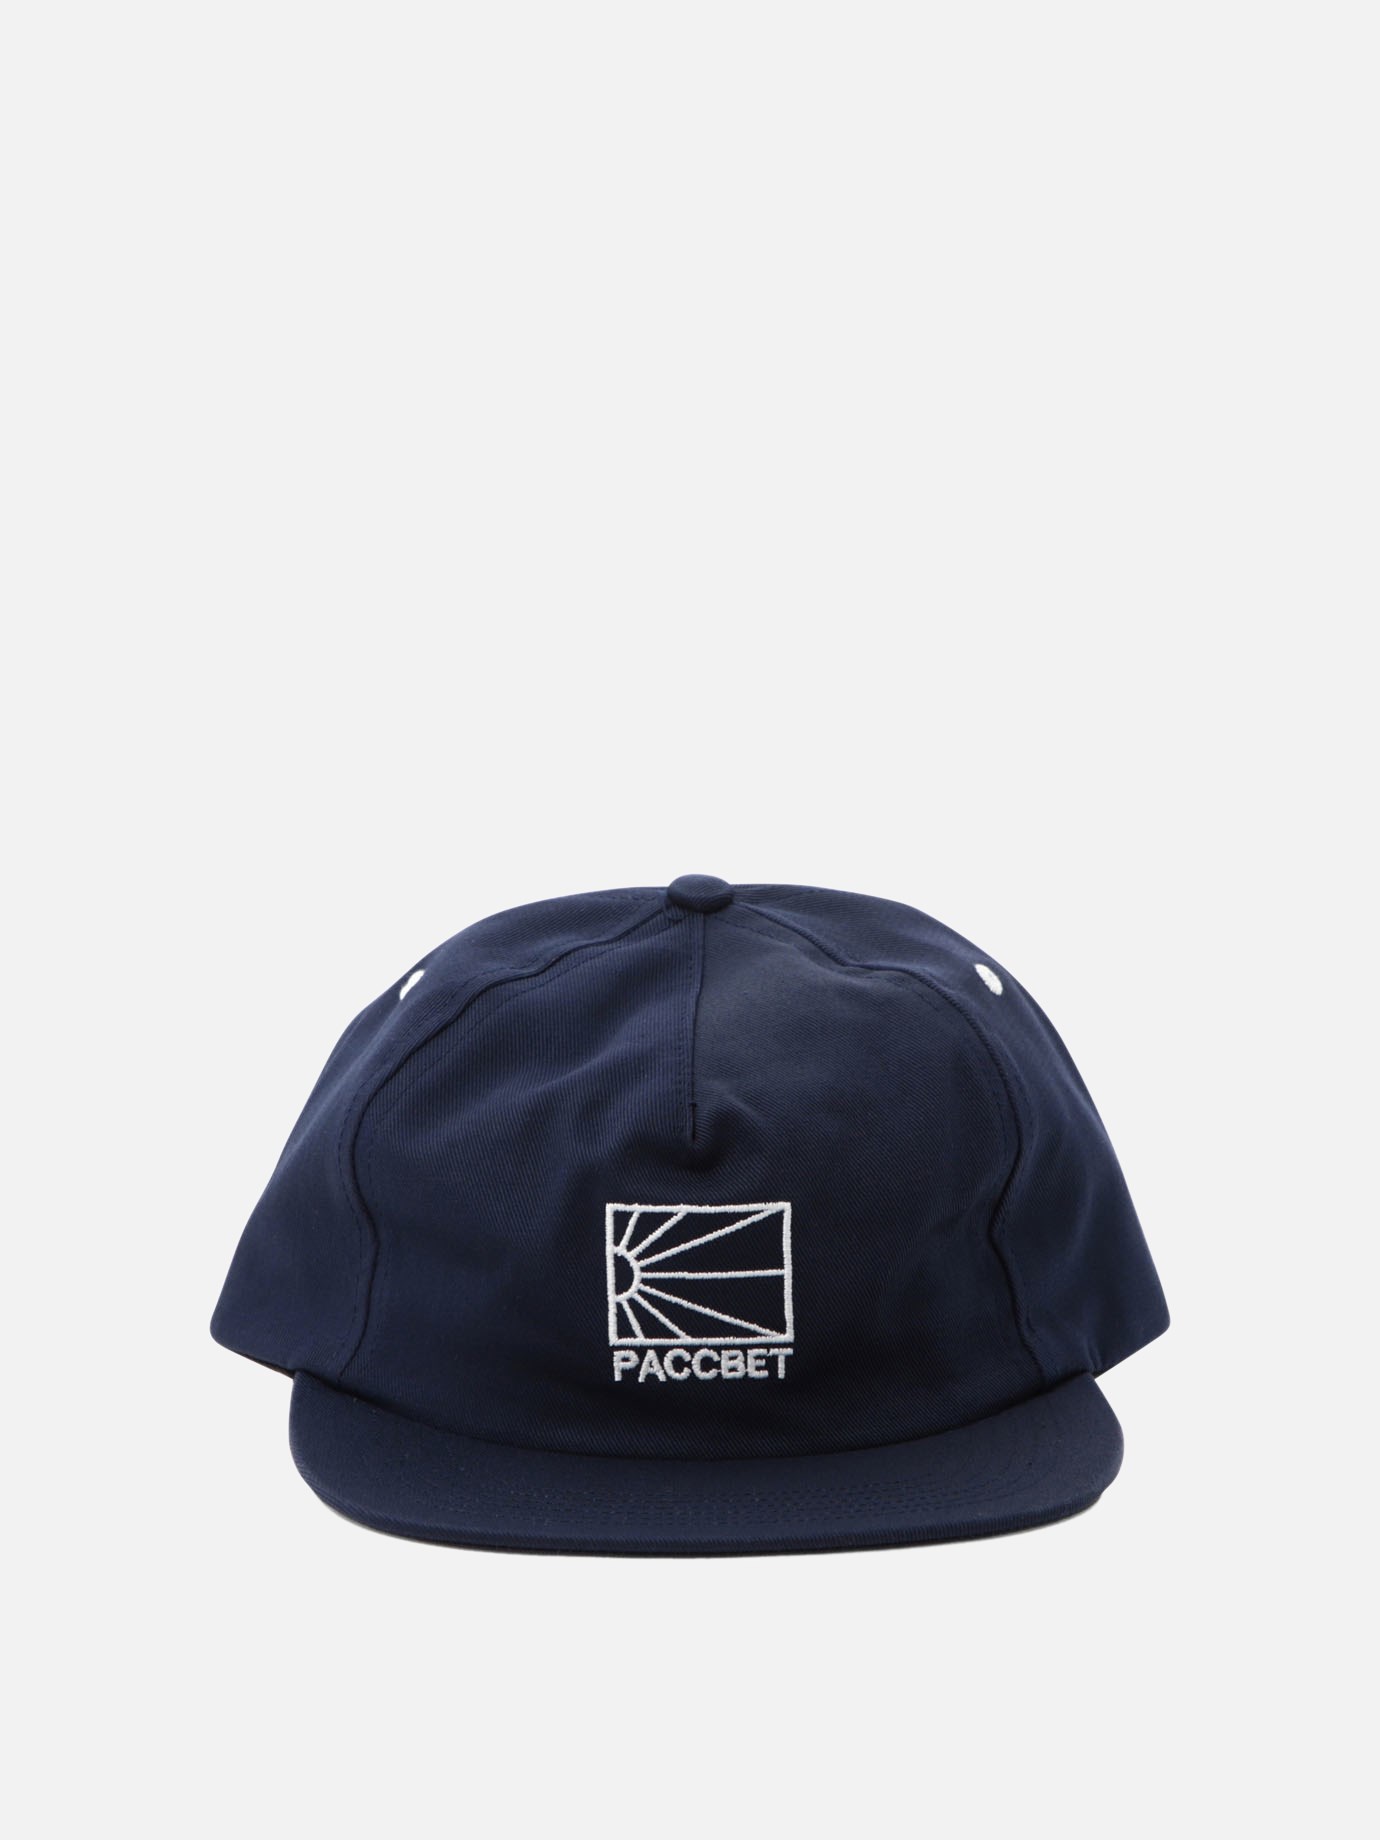 Cappello trucker  Paccbet by Paccbet - 4